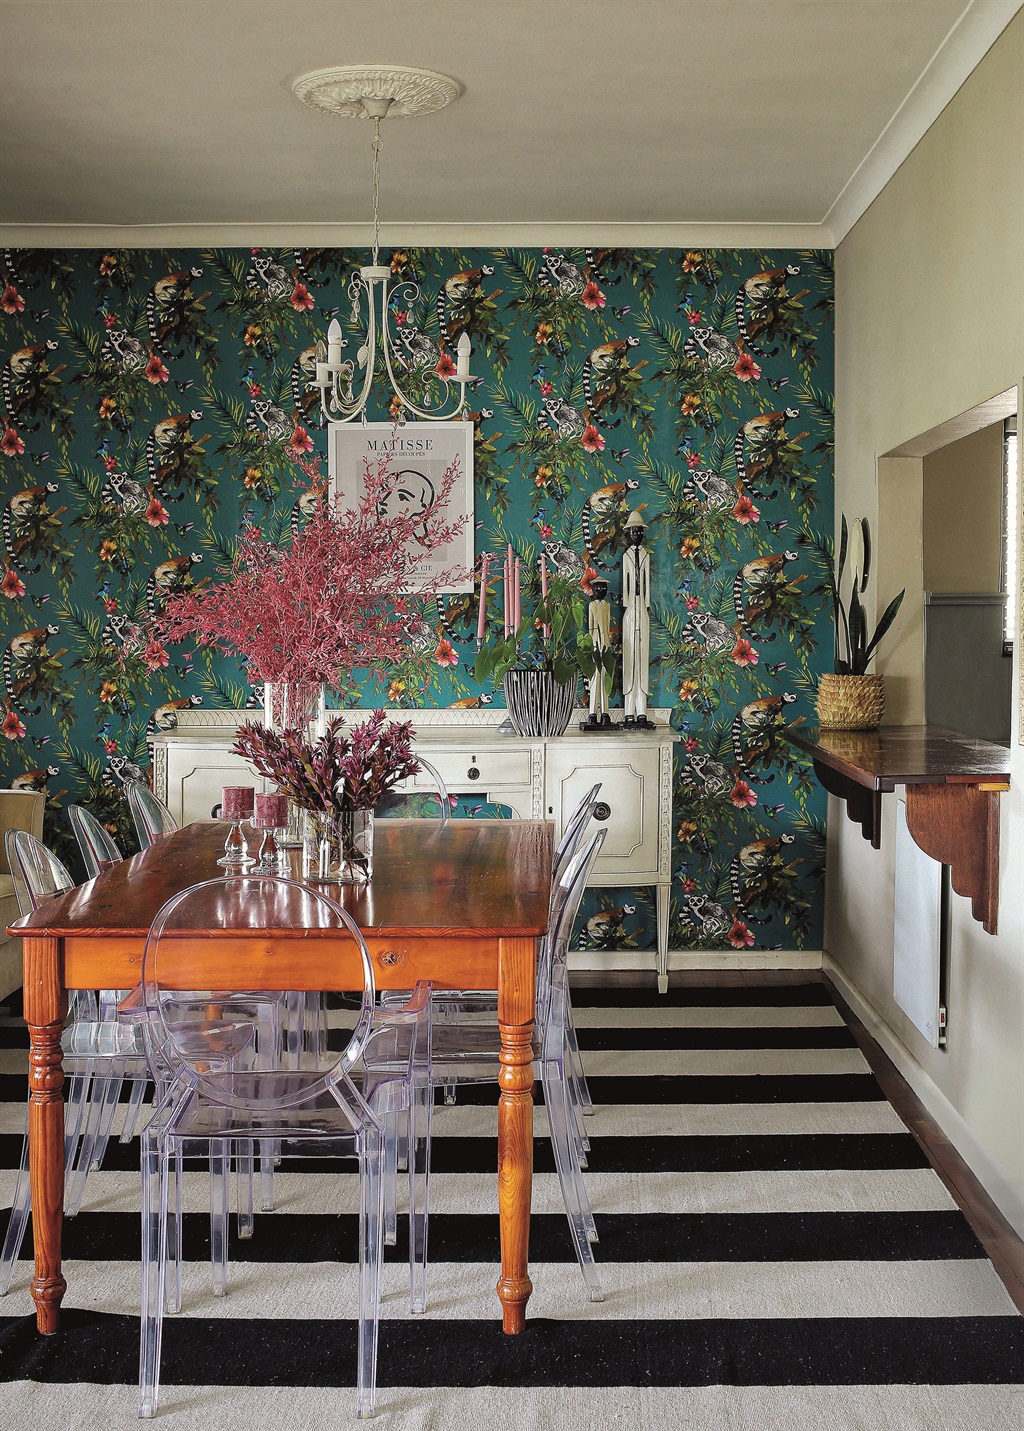 Make a style statement with eye-catching wallpaper | Home